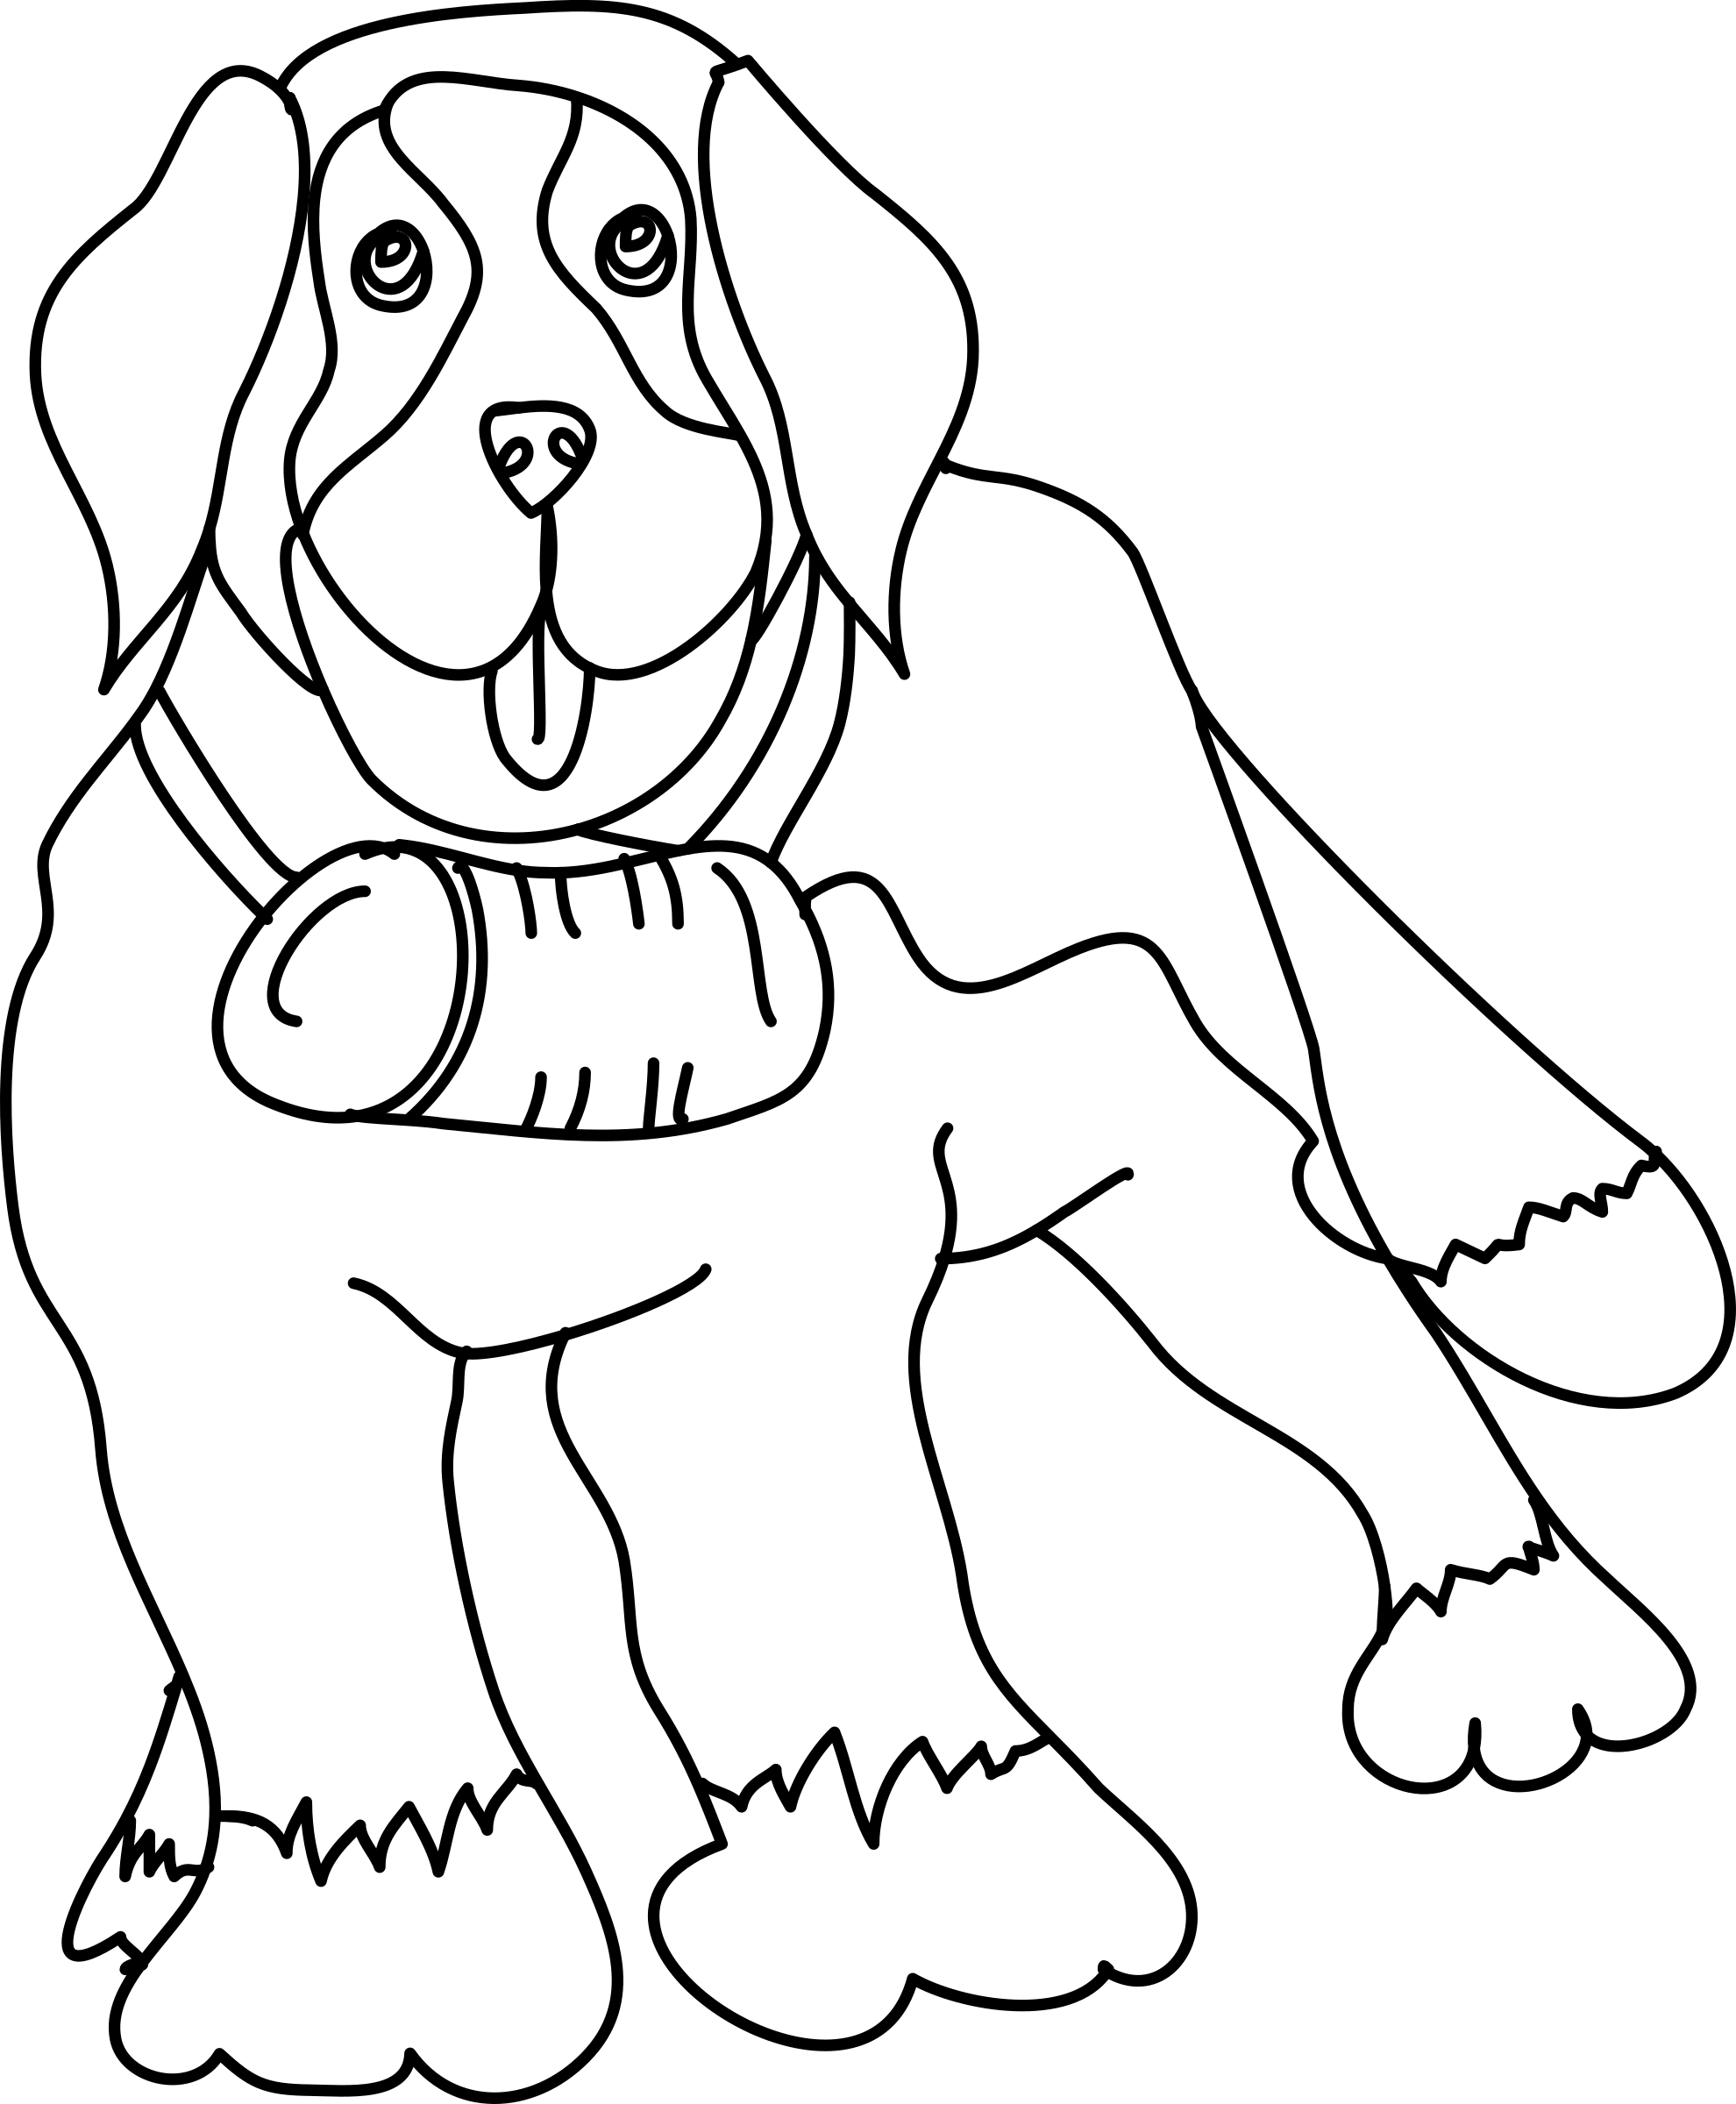 Dog outline drawing at. Winter clipart puppy